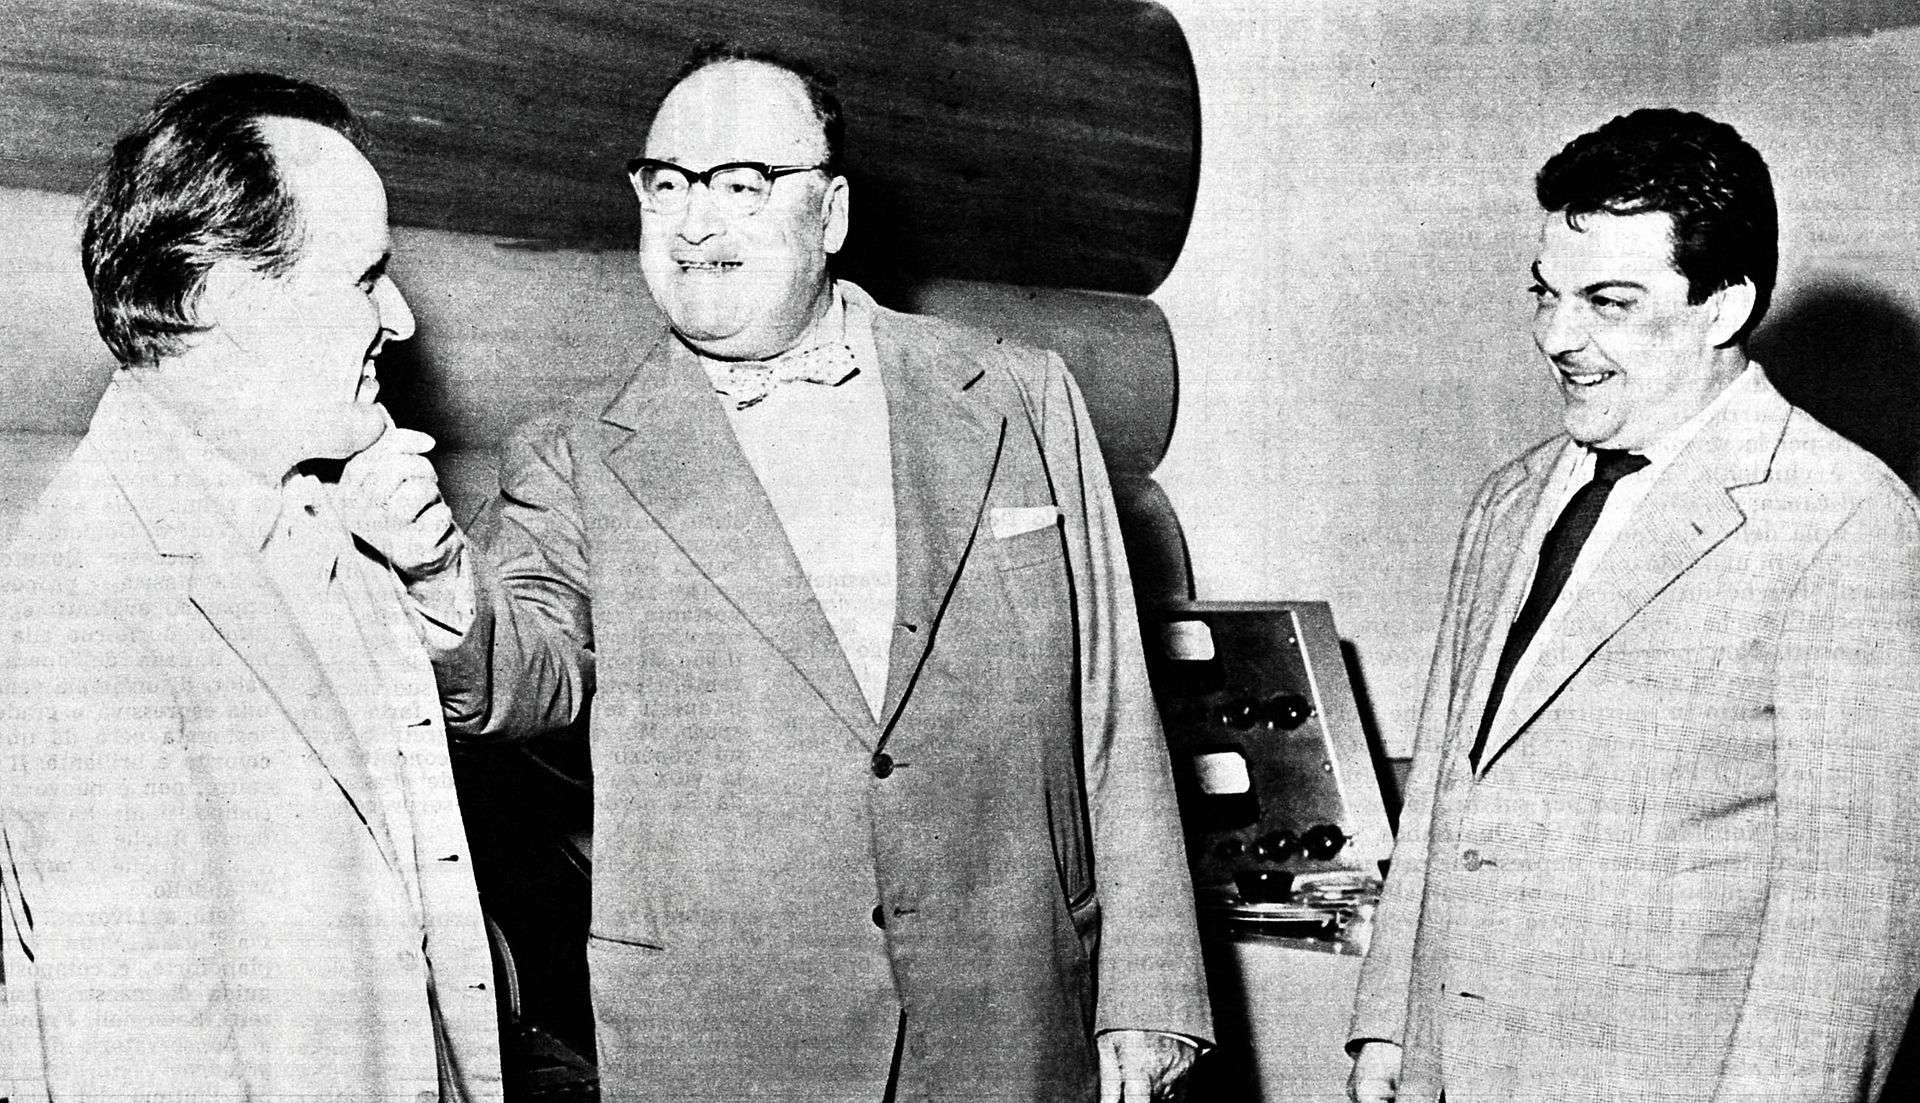 Rota (left) with Riccardo Bacchelli and Bruno Maderna in 1963